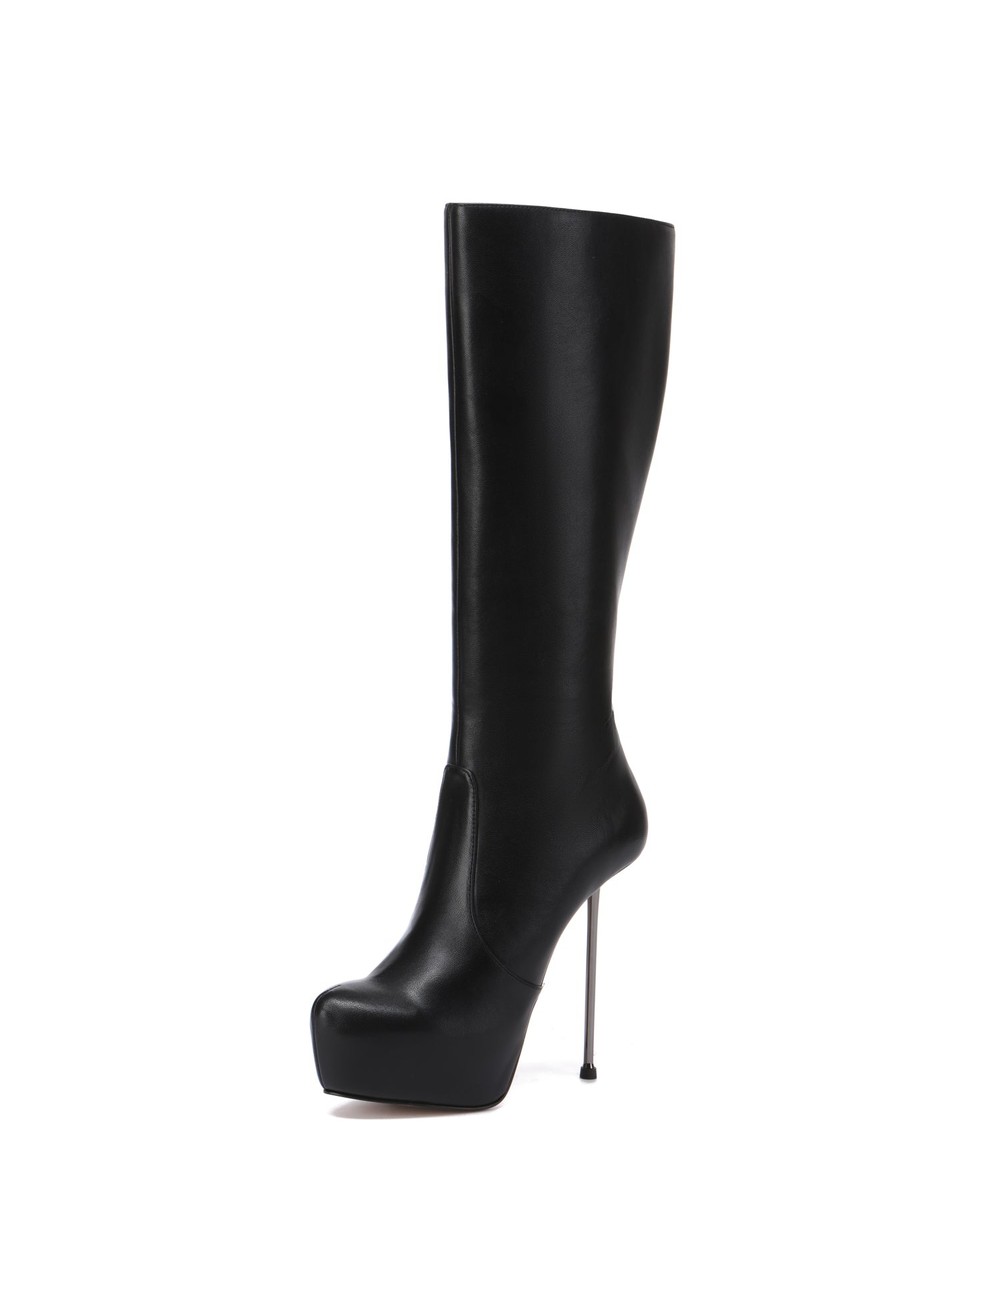 Giaro BEVERLY BLACK MATTE - Giaro High Heels | Official store - All ...